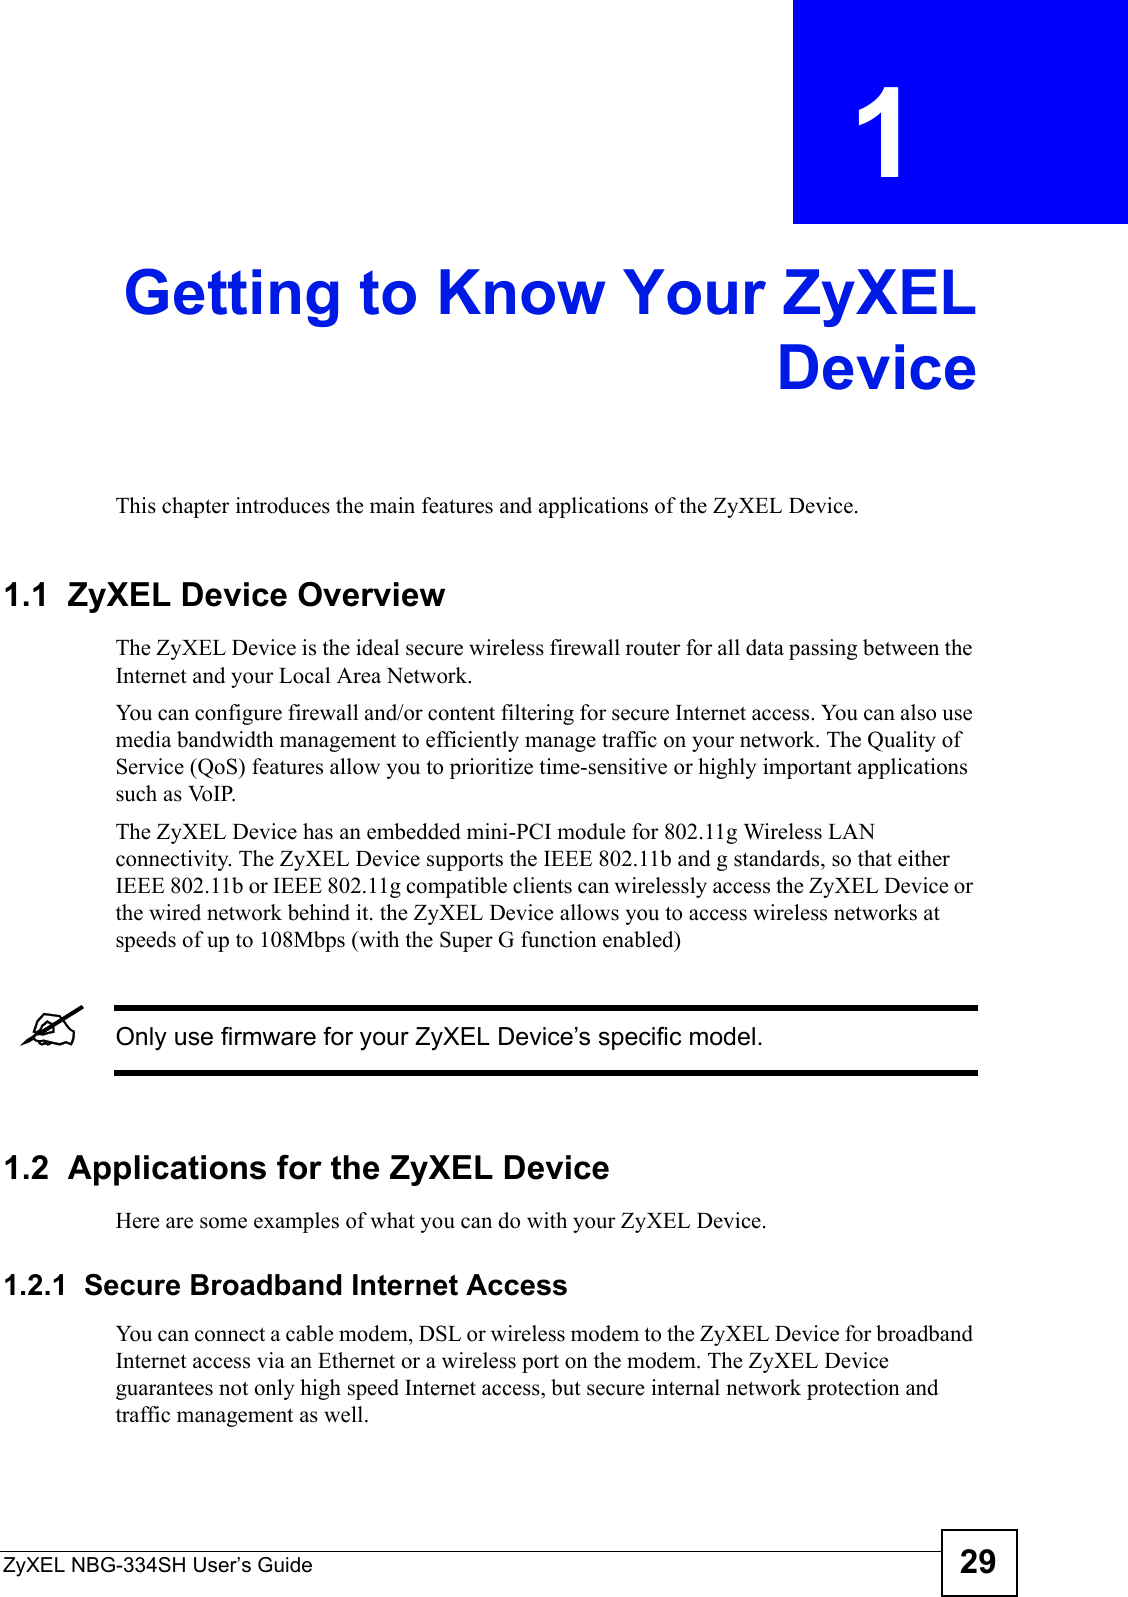 ZyXEL NBG-334SH User’s Guide 29CHAPTER  1 Getting to Know Your ZyXELDeviceThis chapter introduces the main features and applications of the ZyXEL Device.1.1  ZyXEL Device OverviewThe ZyXEL Device is the ideal secure wireless firewall router for all data passing between the Internet and your Local Area Network.You can configure firewall and/or content filtering for secure Internet access. You can also use media bandwidth management to efficiently manage traffic on your network. The Quality of Service (QoS) features allow you to prioritize time-sensitive or highly important applications such as VoIP.The ZyXEL Device has an embedded mini-PCI module for 802.11g Wireless LAN connectivity. The ZyXEL Device supports the IEEE 802.11b and g standards, so that either IEEE 802.11b or IEEE 802.11g compatible clients can wirelessly access the ZyXEL Device or the wired network behind it. the ZyXEL Device allows you to access wireless networks at speeds of up to 108Mbps (with the Super G function enabled) &quot;Only use firmware for your ZyXEL Device’s specific model.1.2  Applications for the ZyXEL Device Here are some examples of what you can do with your ZyXEL Device. 1.2.1  Secure Broadband Internet Access You can connect a cable modem, DSL or wireless modem to the ZyXEL Device for broadband Internet access via an Ethernet or a wireless port on the modem. The ZyXEL Device guarantees not only high speed Internet access, but secure internal network protection and traffic management as well. 